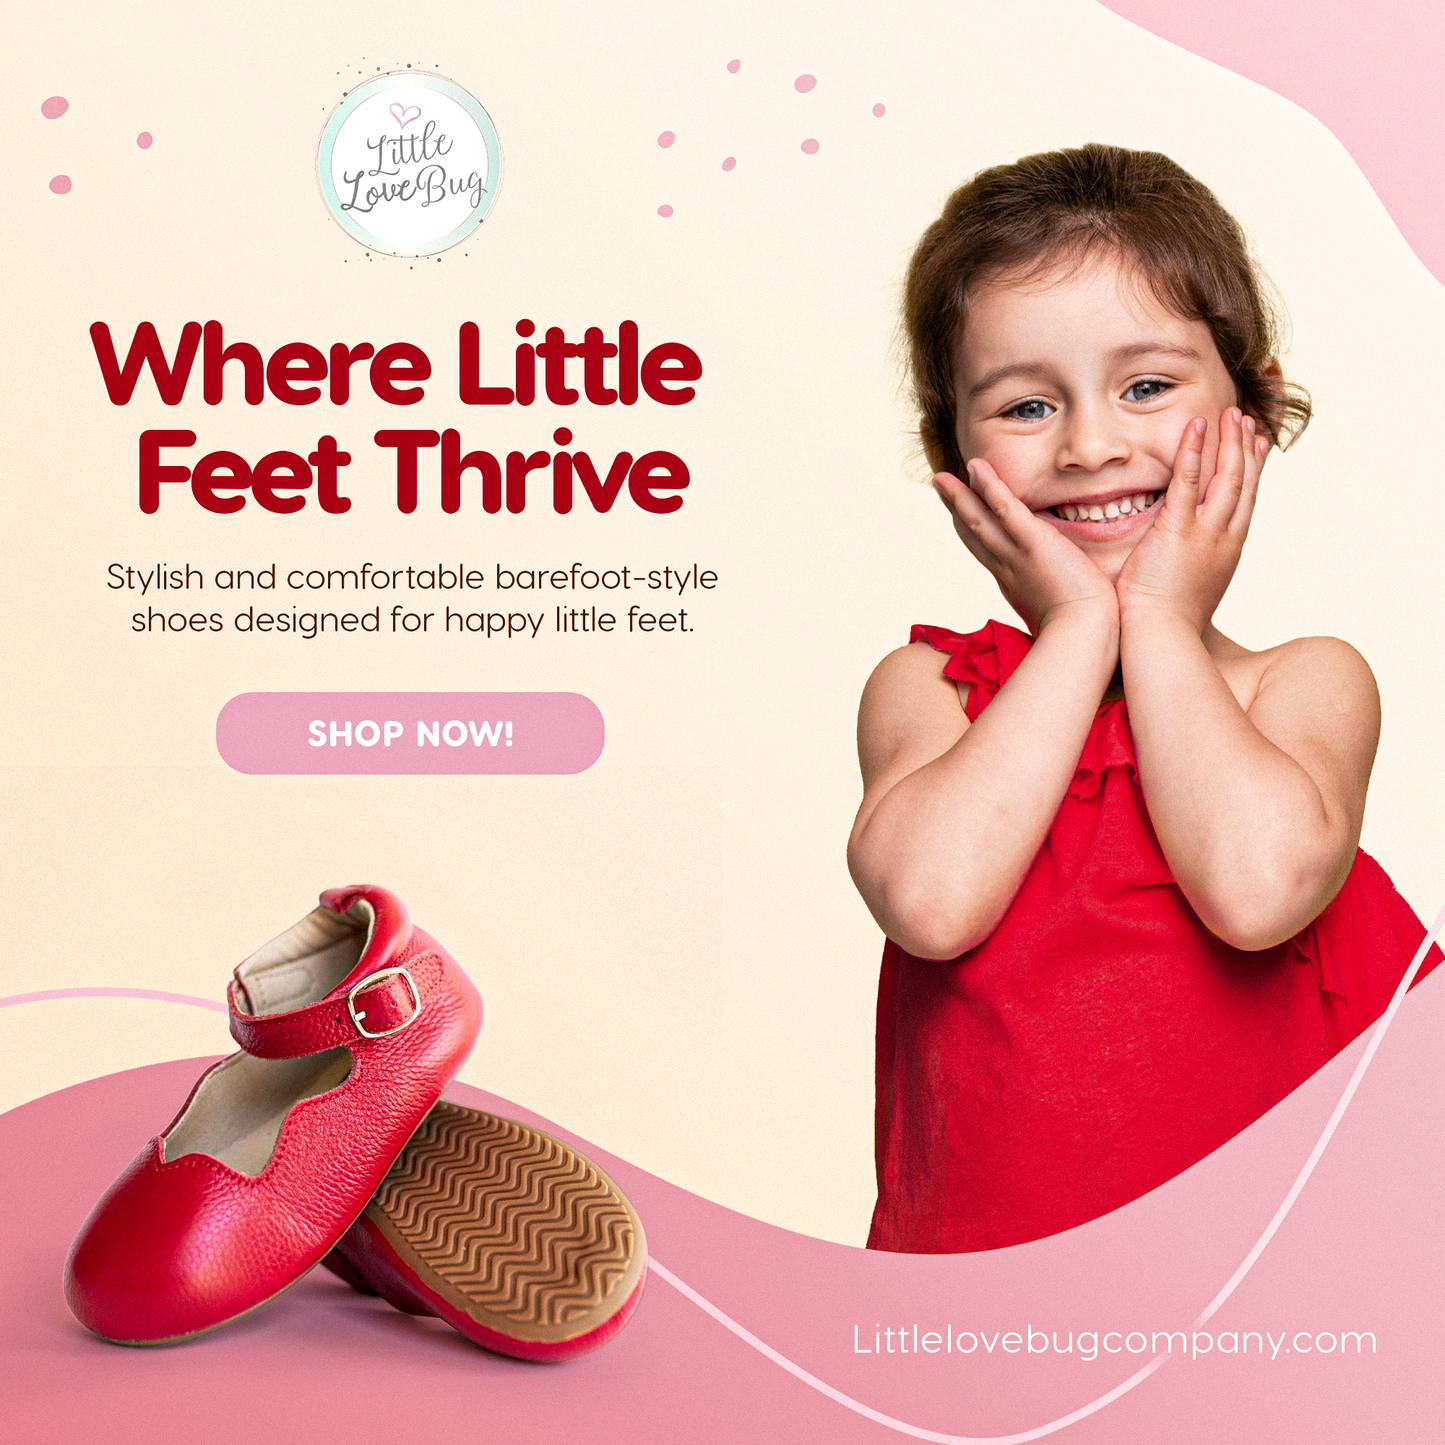 Choosing the Best Shoes for Developing Feet: The Benefits of Barefoot-Style Footwear